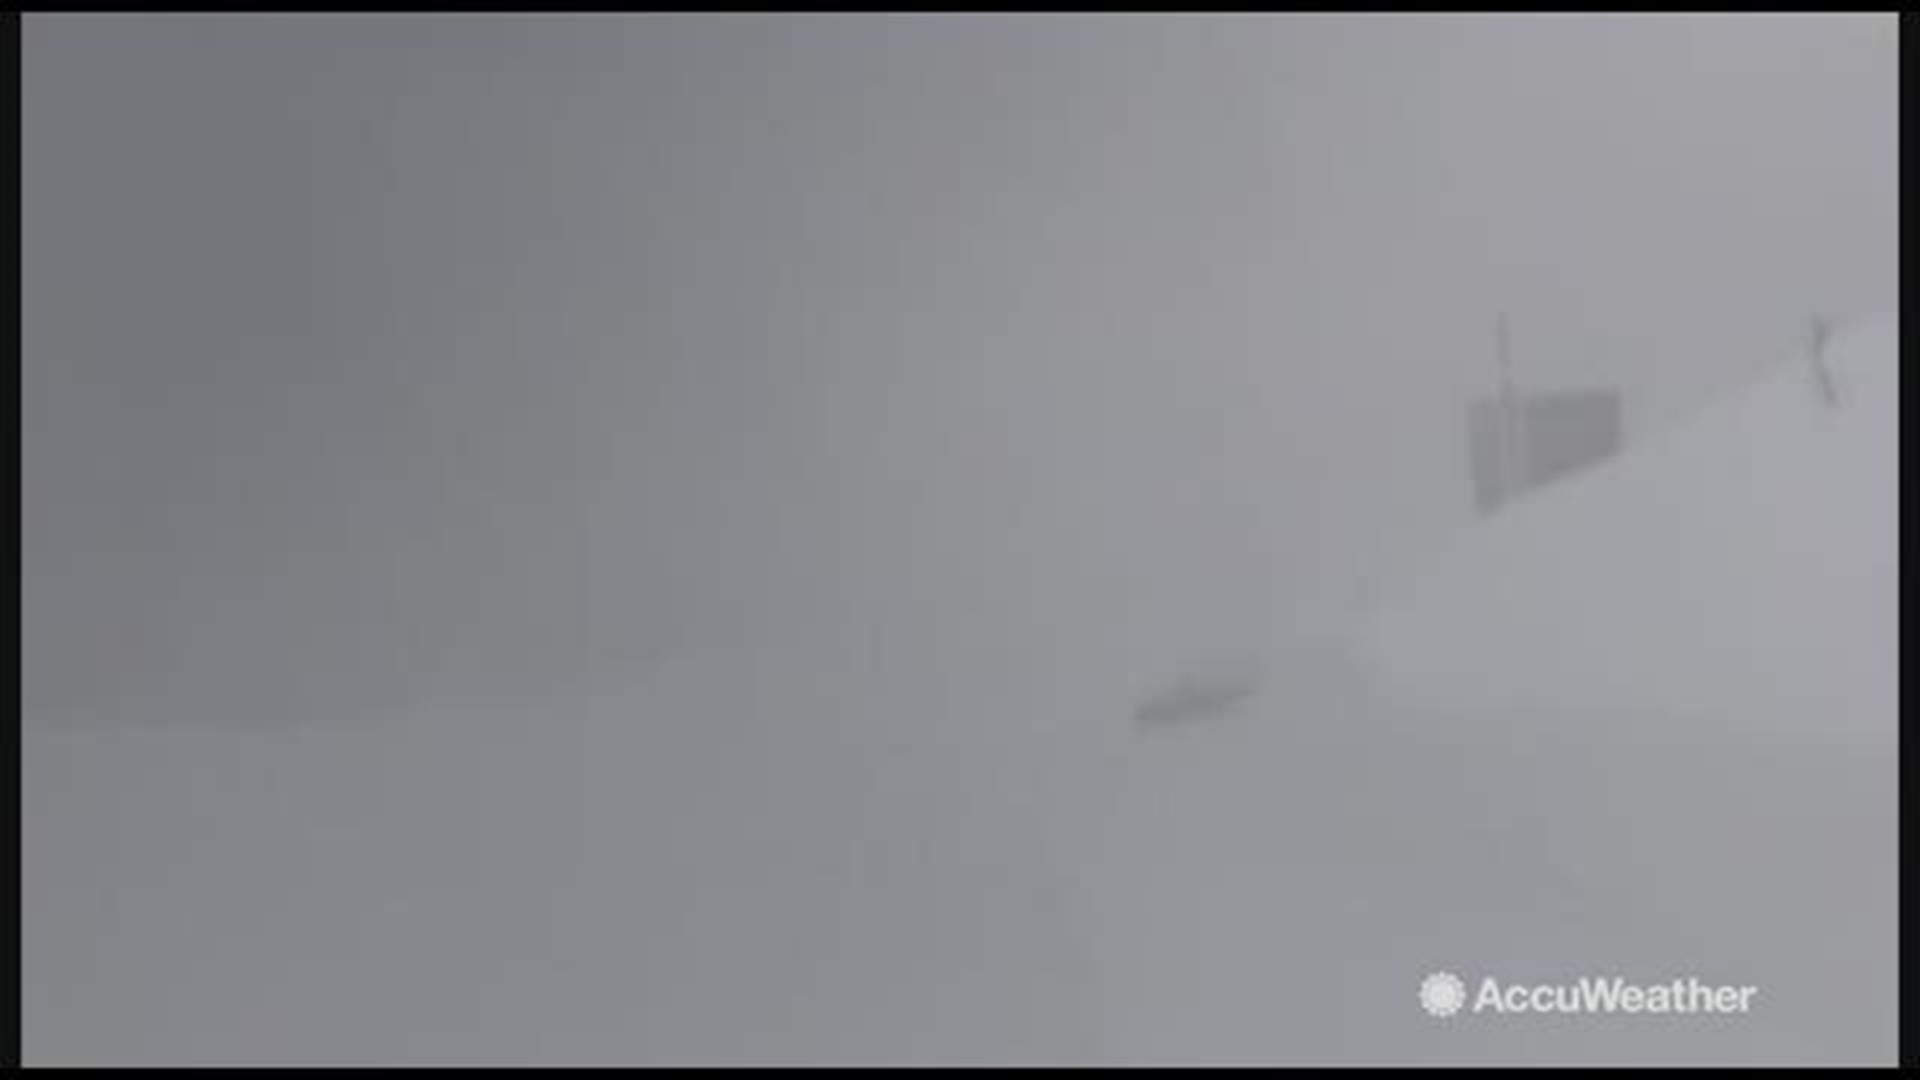 The extreme wind and heavy snowfall created whiteout conditions in Mammoth Lakes, California, where AccuWeather's Reed Timmer is monitoring the storm.